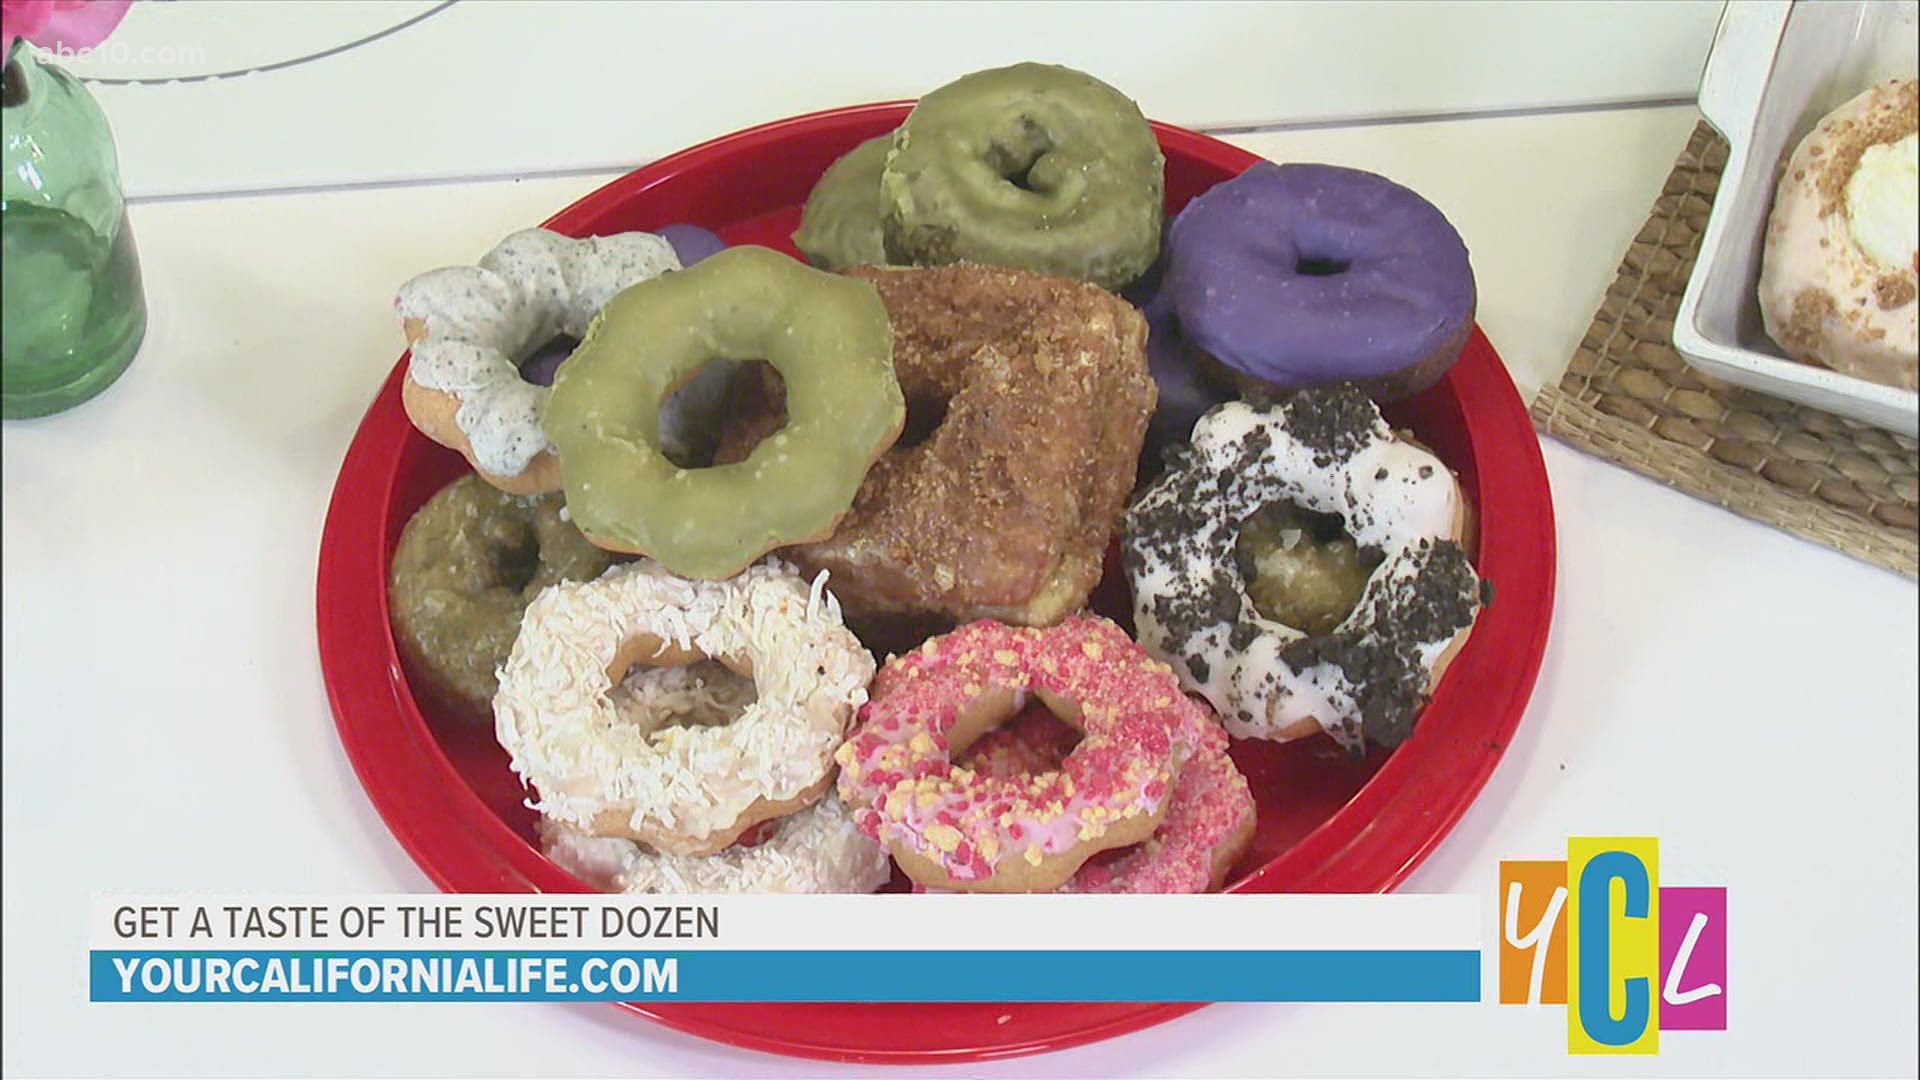 A taste of the sweet dozen and how this family-owned and operated donut shop is baking up American doughy goodness infused with Asian influences!